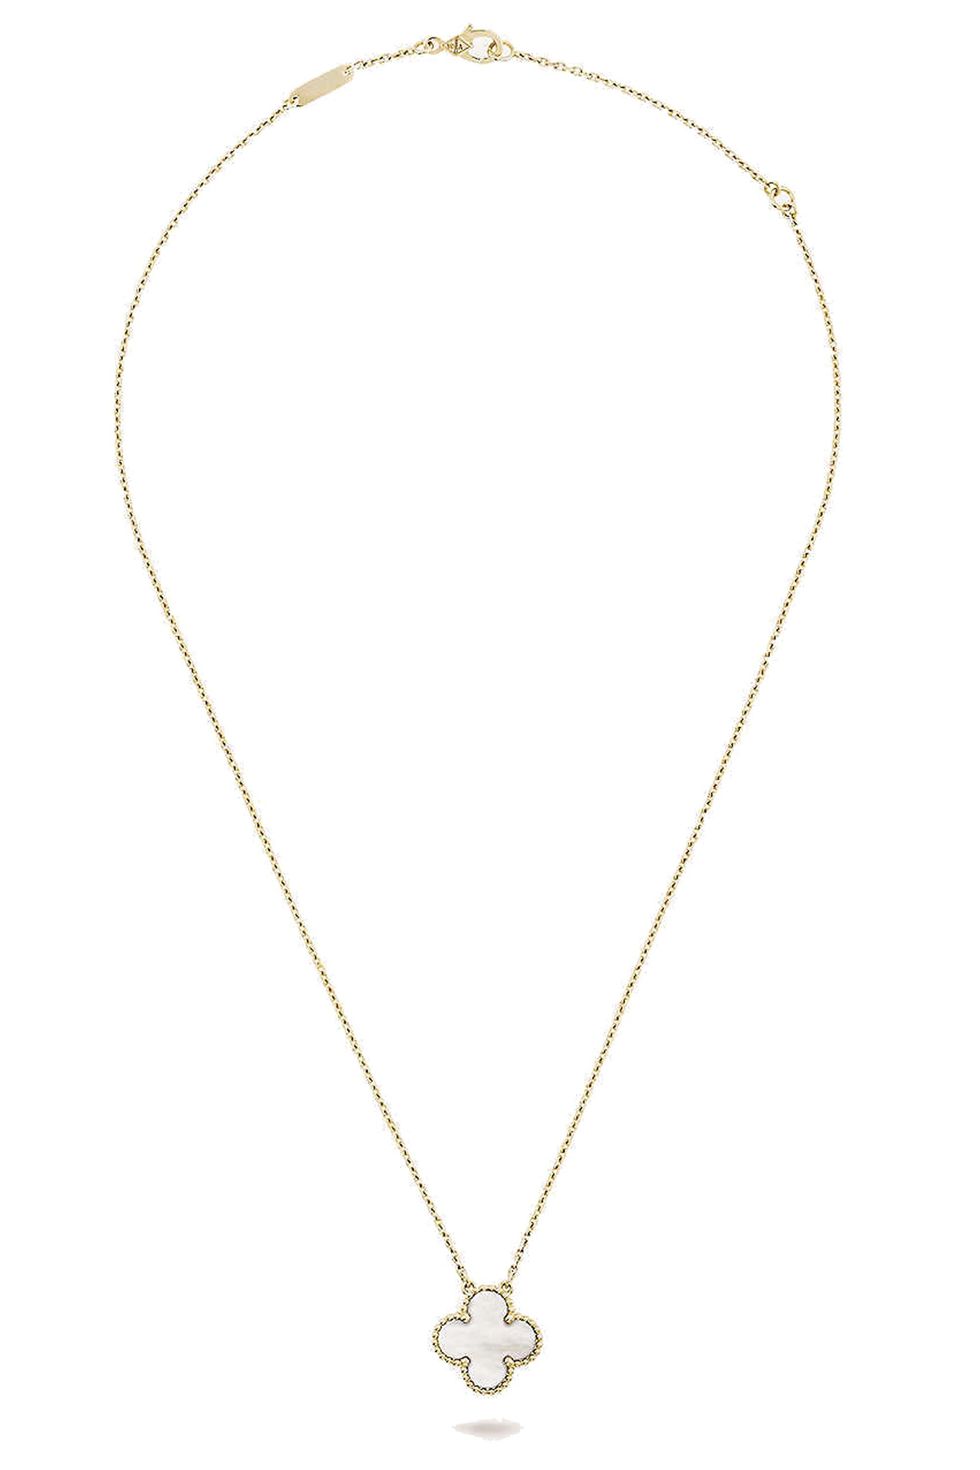 Von Maur - Jewelry pieces made to layer or wear alone. Make them chunky or  delicate. Either way, we 💗 the trend. Shop now  # VonMaur #ShoppingPerfected #chainlinkjewelry #linkedtogether